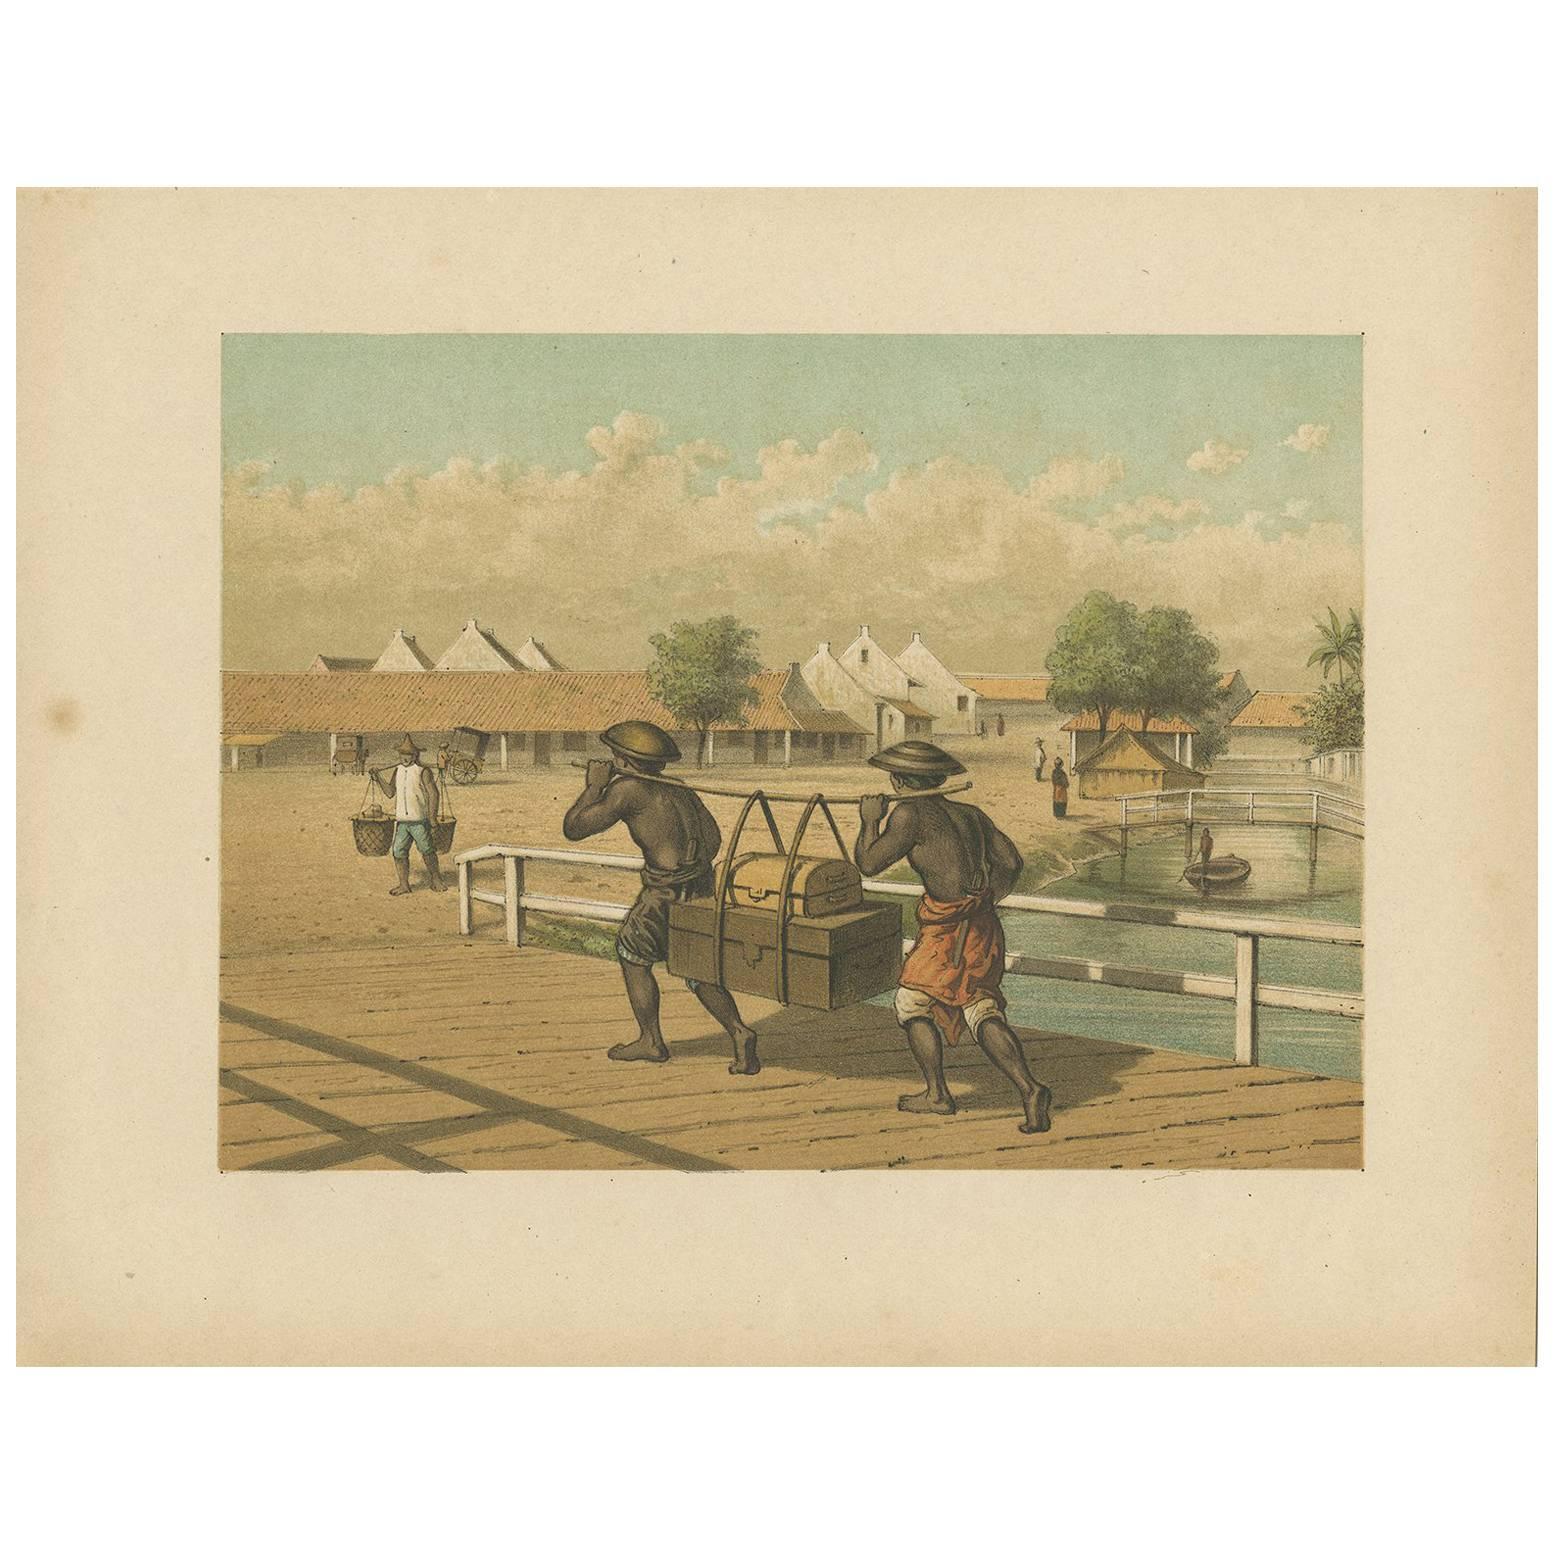 Antique Print of native 'koelies' or carriers on Java by M.T.H. Perelaer (1888) For Sale